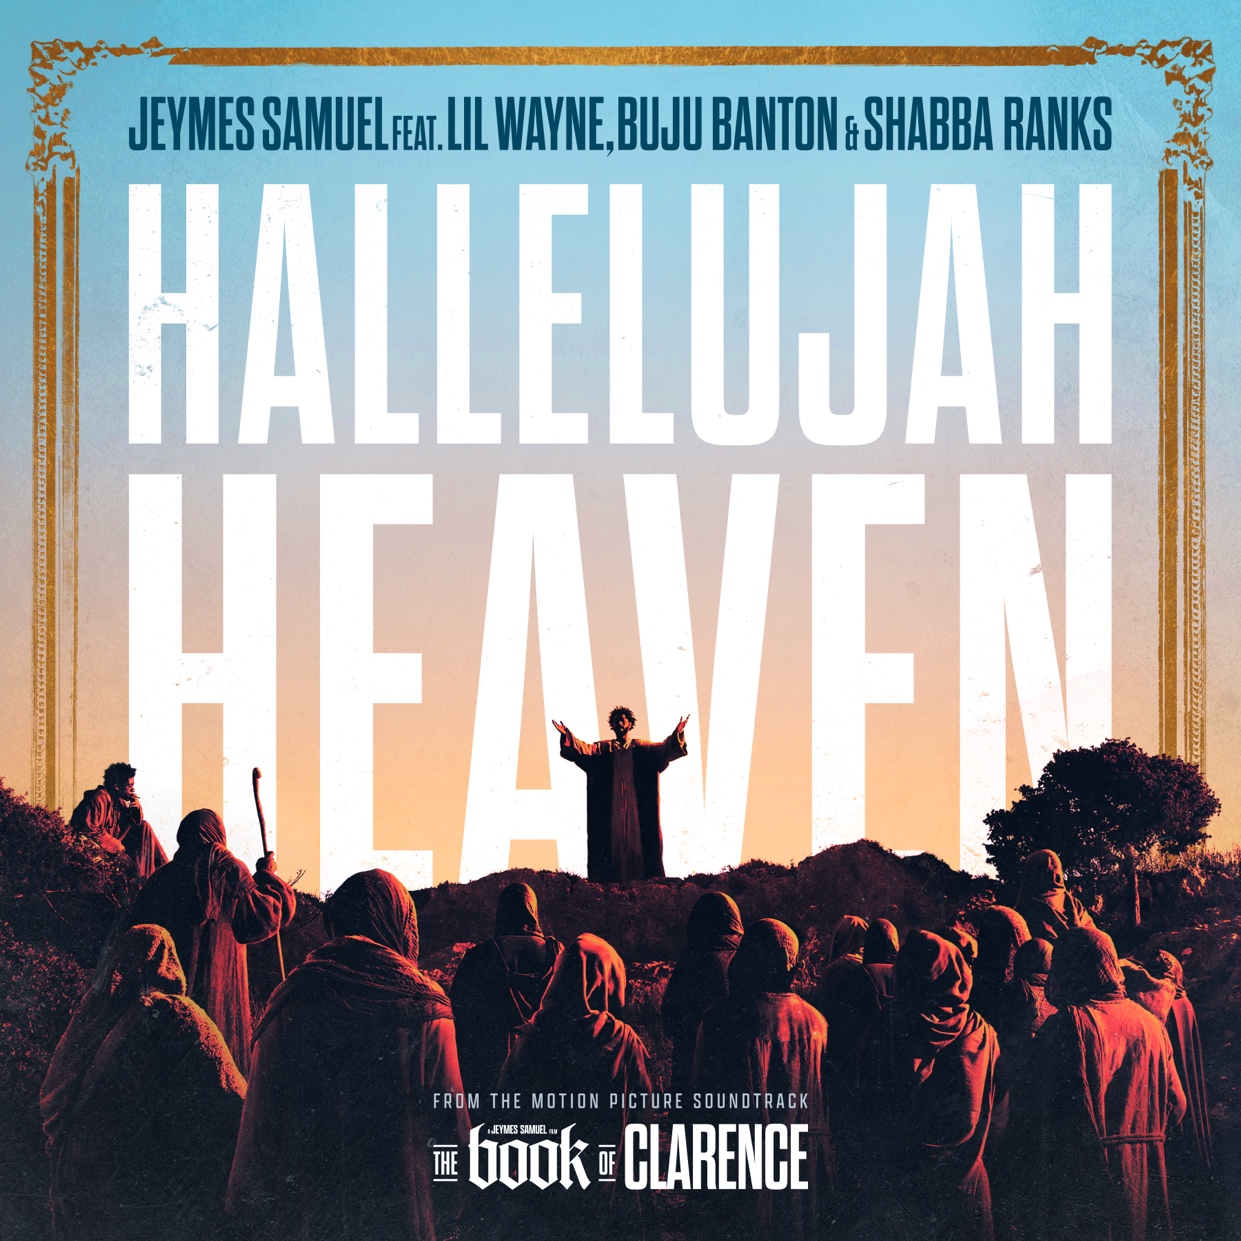 Hallelujah Heaven from The Book Of Clarence soundtrack artwork